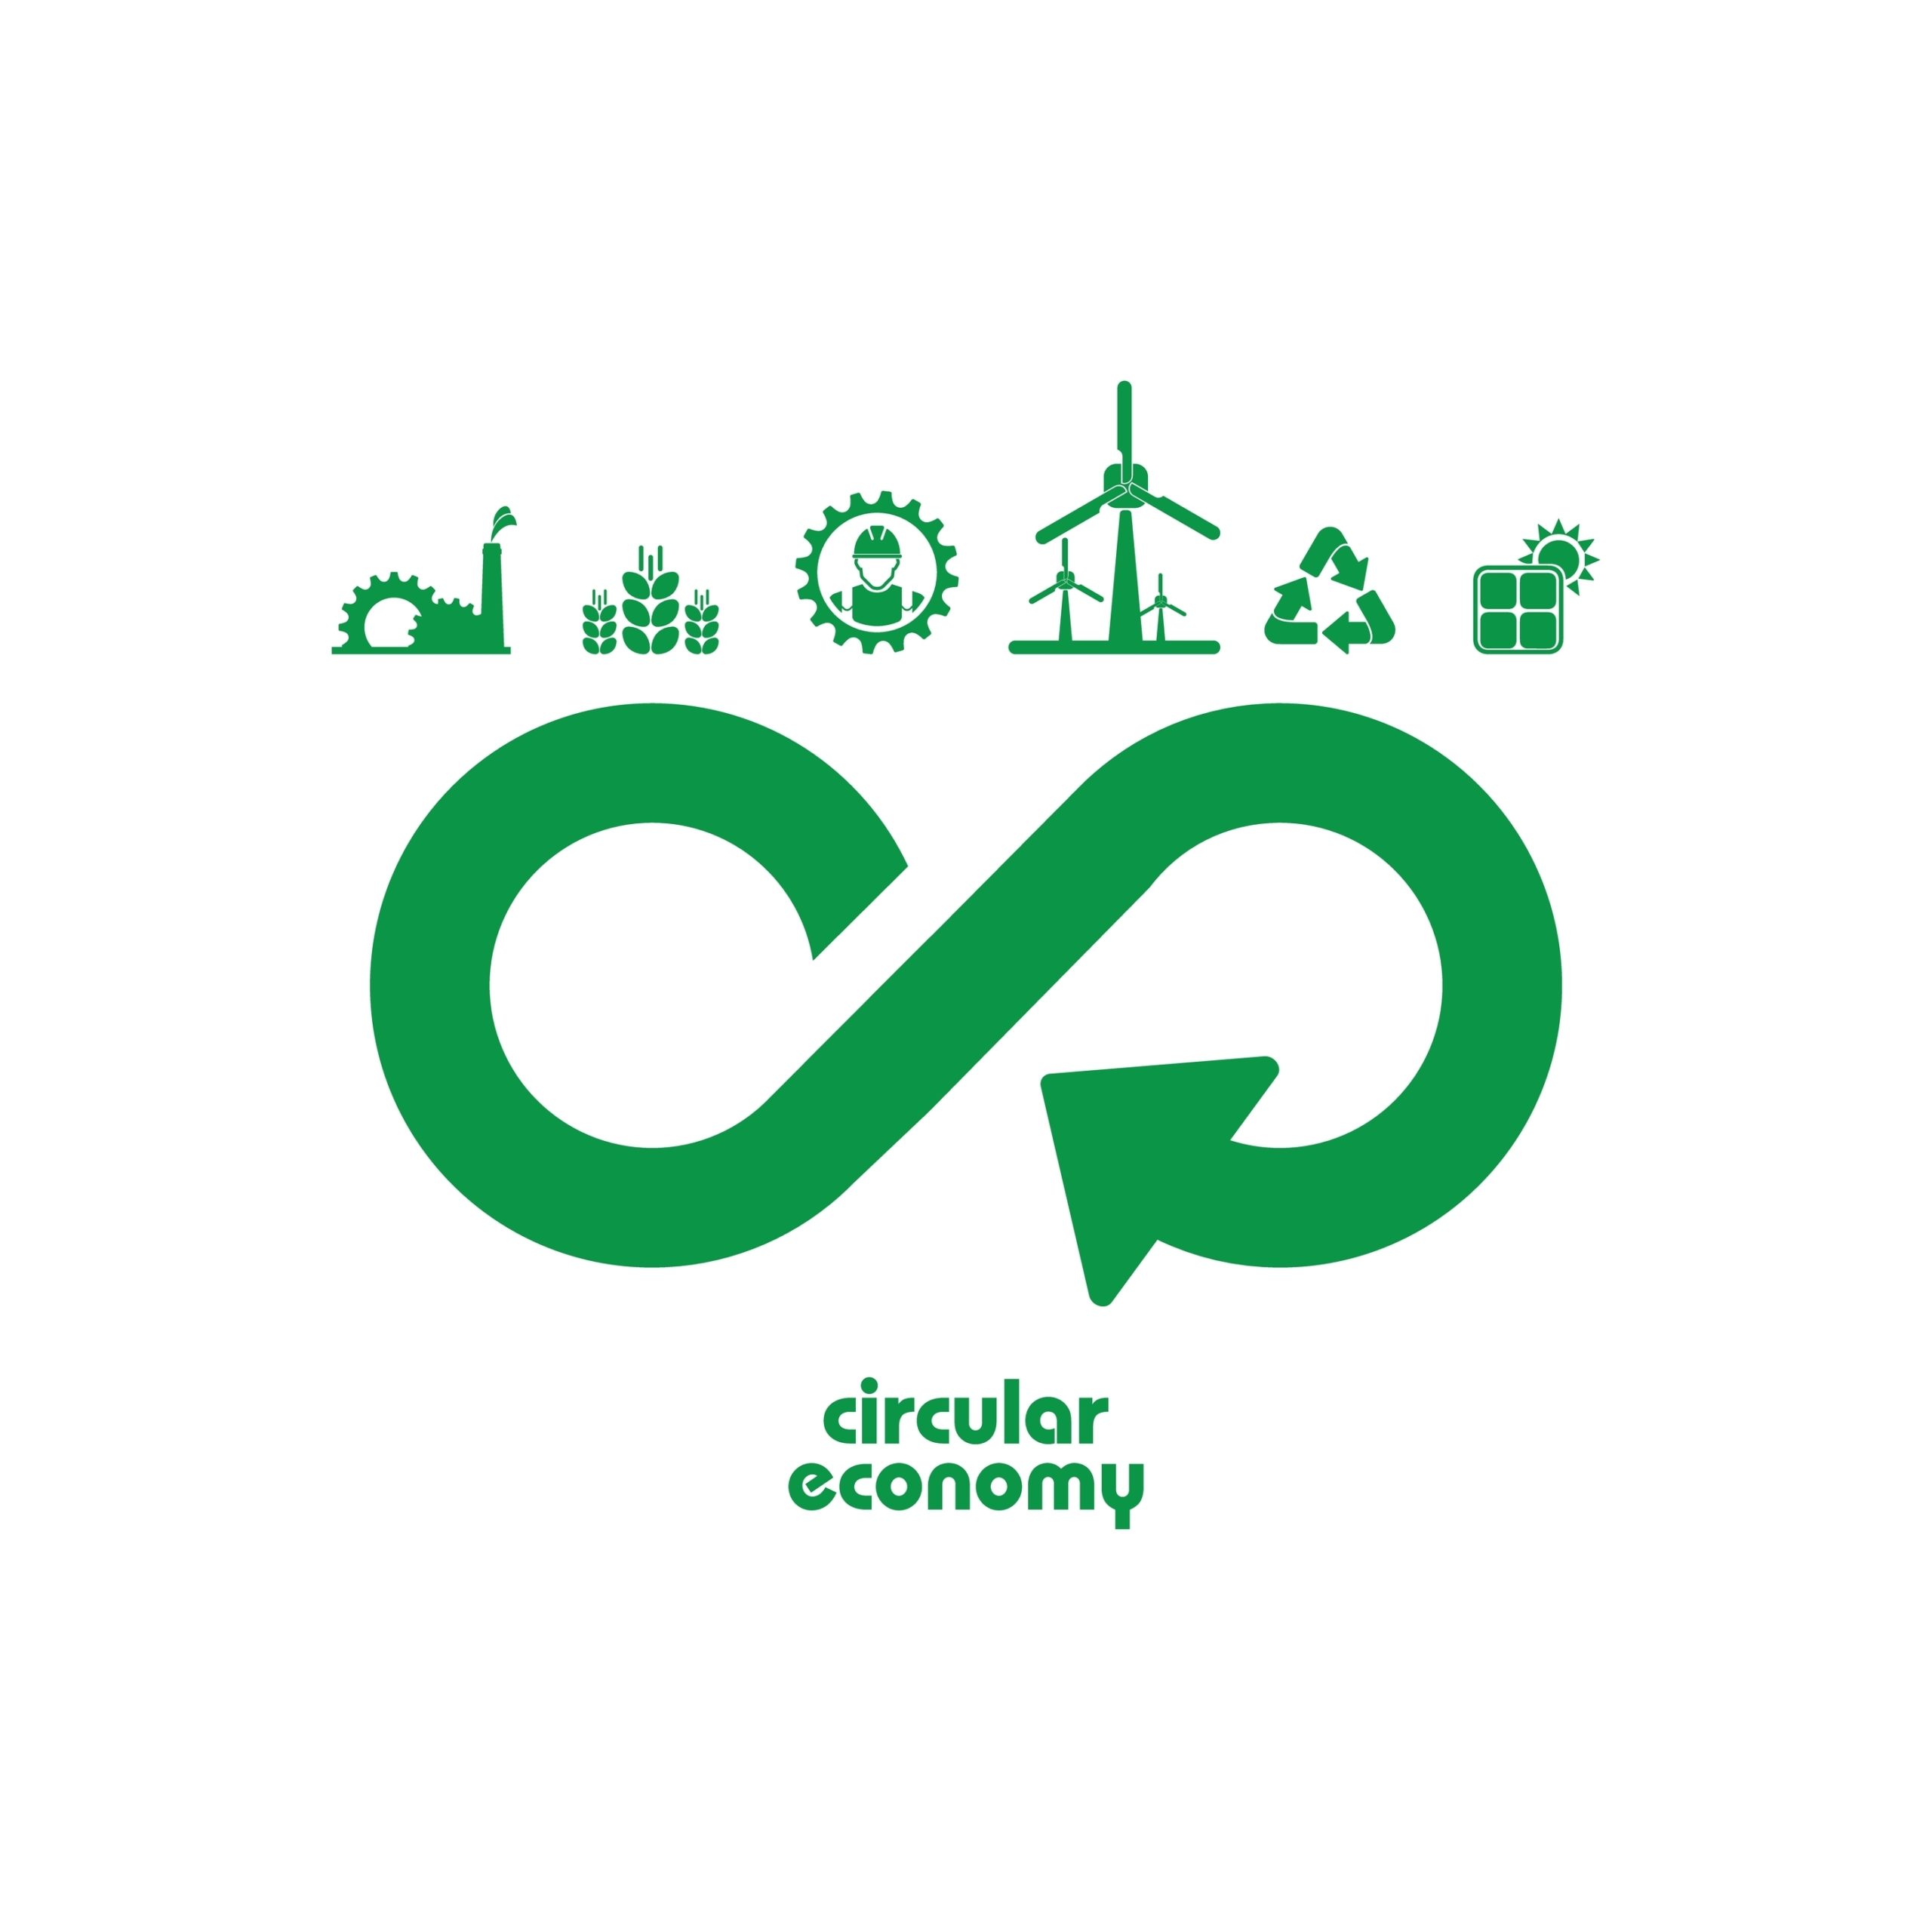 Circular Economy Vector Images (over 6,700)